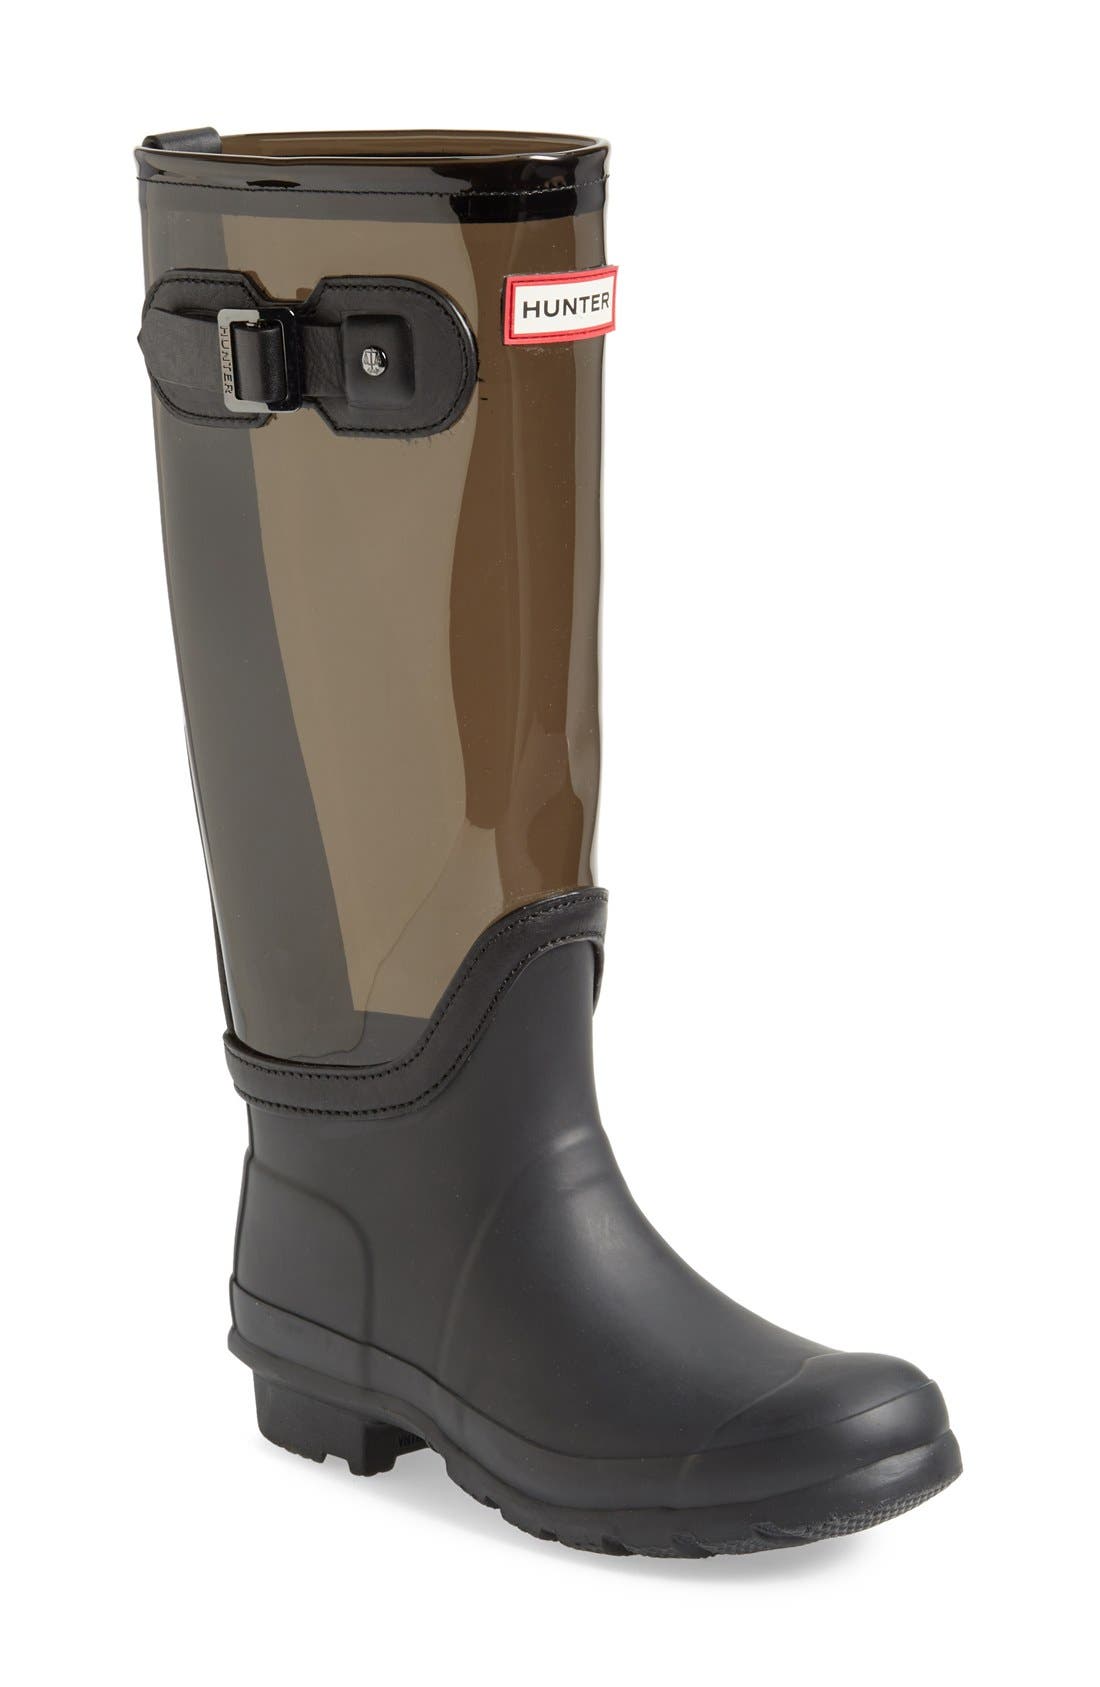 clear rain boots for adults